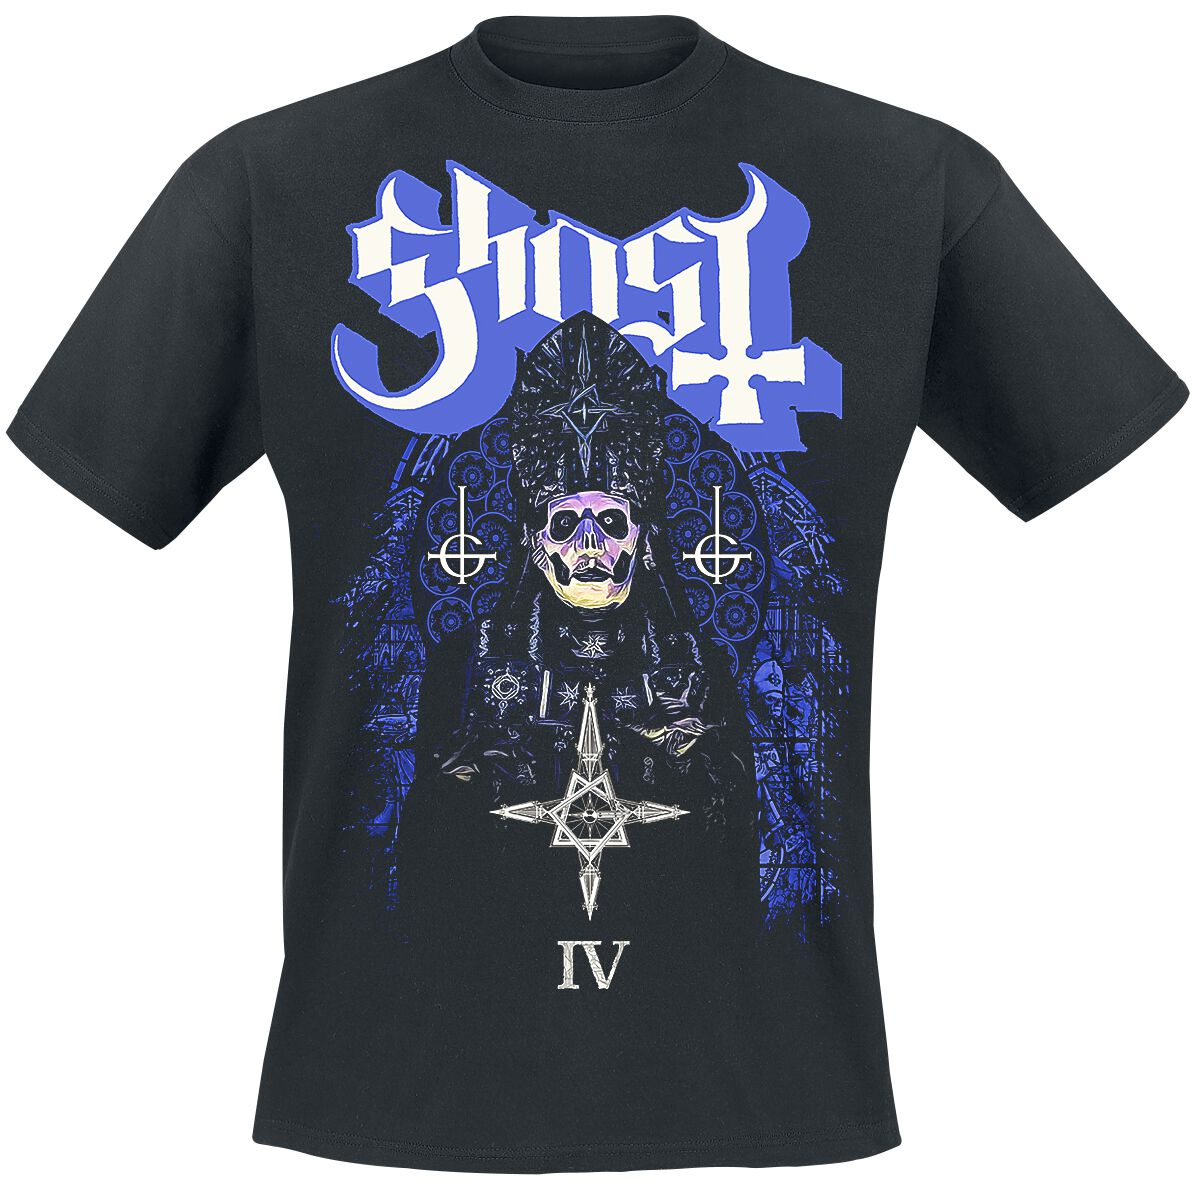 Ghost Stained Glass IV T-Shirt schwarz in 4XL